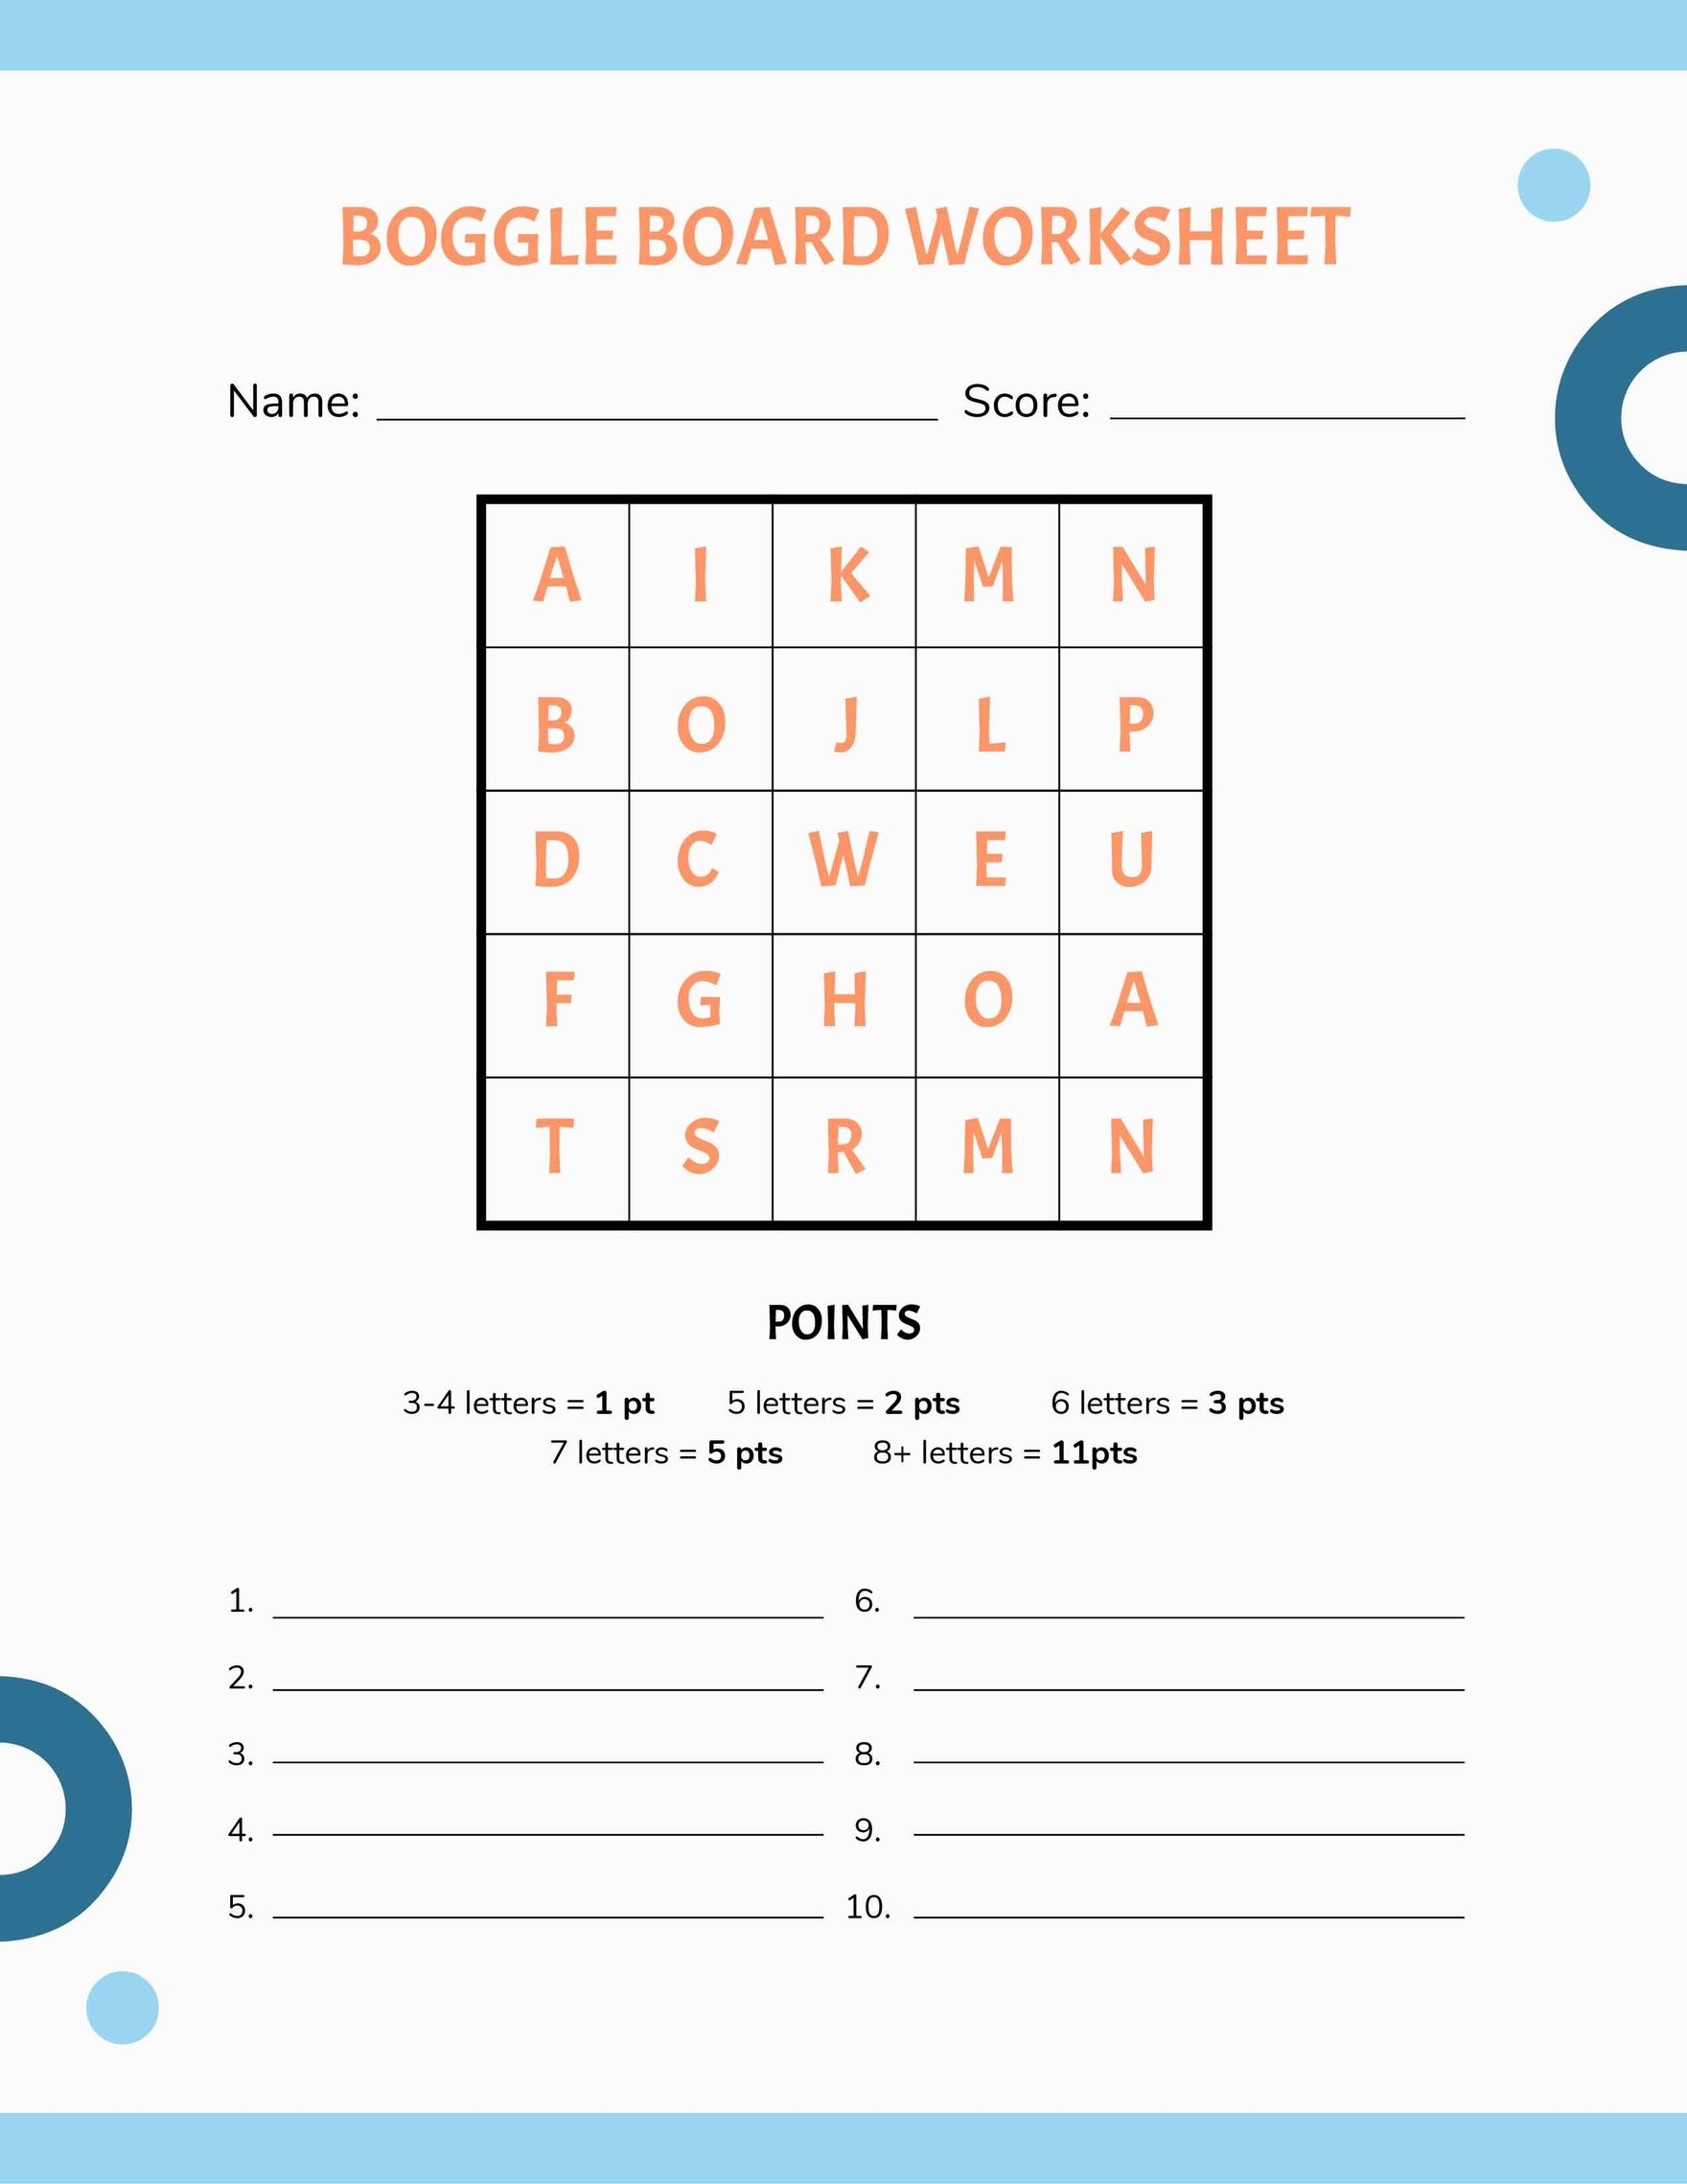 free-math-boggle-board-template-google-docs-word-apple-pages-pdf-template